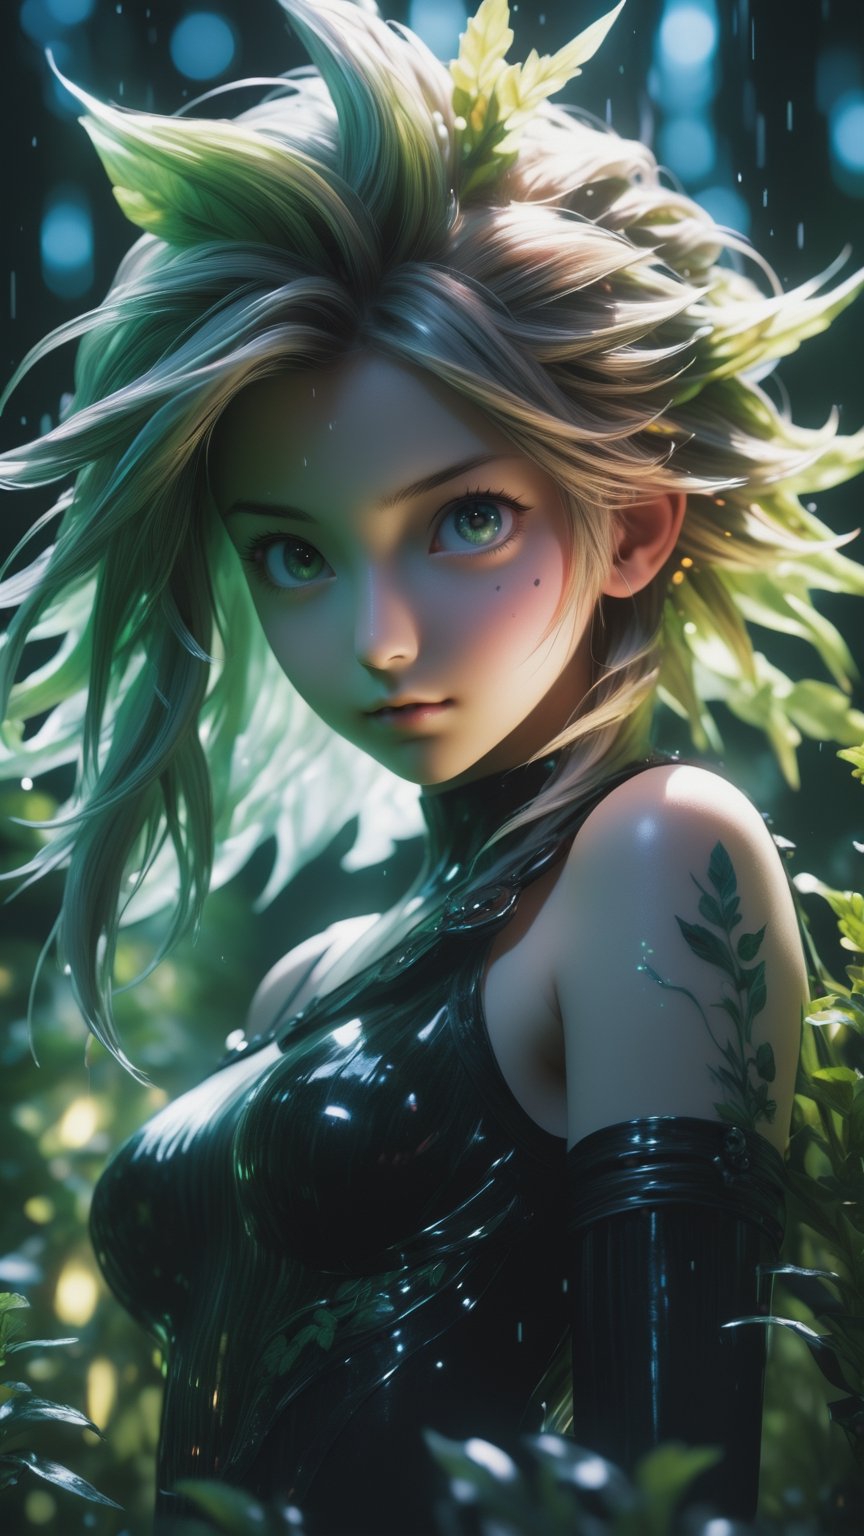 Cinematic of fairy girl,  cool_vibe,  small_nose,  (èå°å°),  glowing_eyes,  realistic artwork,  high detailed,  professional,  upper body photo of a transparent porcelain cute creature looking at viewer,  with glowing backlit panels,  anatomical plants,  dark forest,  grainy,  shiny,  with vibrant colors,  colorful,  ((realistic skin,  glow, )) surreal objects floating,  ((floating:1.4)),  contrasting shadows,  photographic,  niji style,  1girl,  xxmixgirl,  FilmGirl,  aura_glowing,  colored_aura,  Movie Still,  final_fantasy_vii_remake,  ((big_breast:1.3))